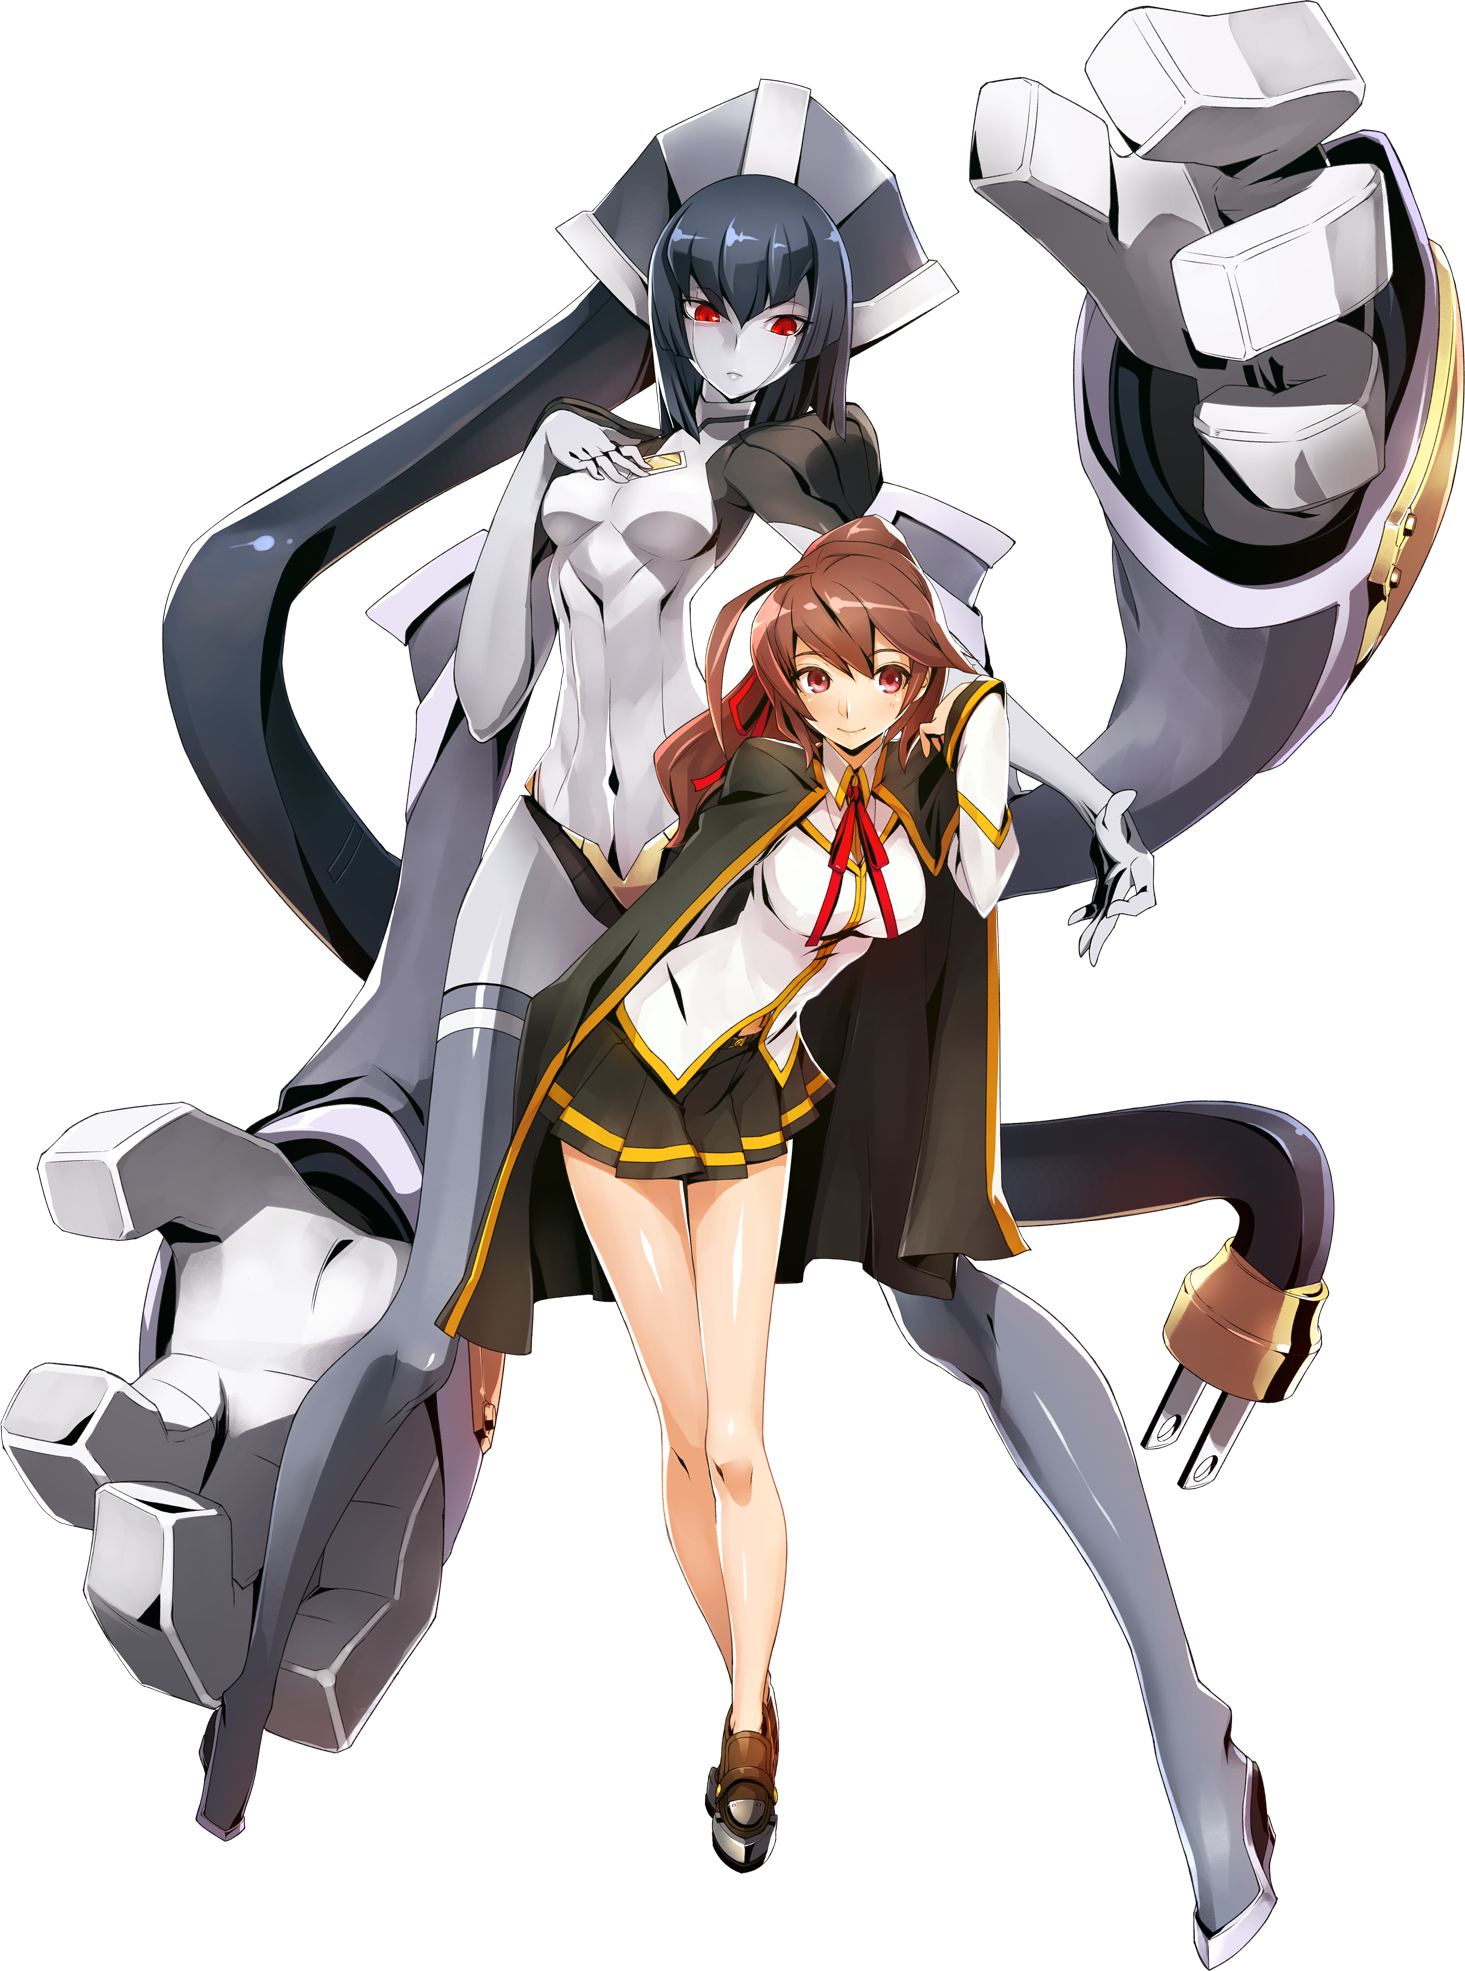 Celica_A._Mercury_%28Centralfiction%2C_Character_Select_Artwork%29.png